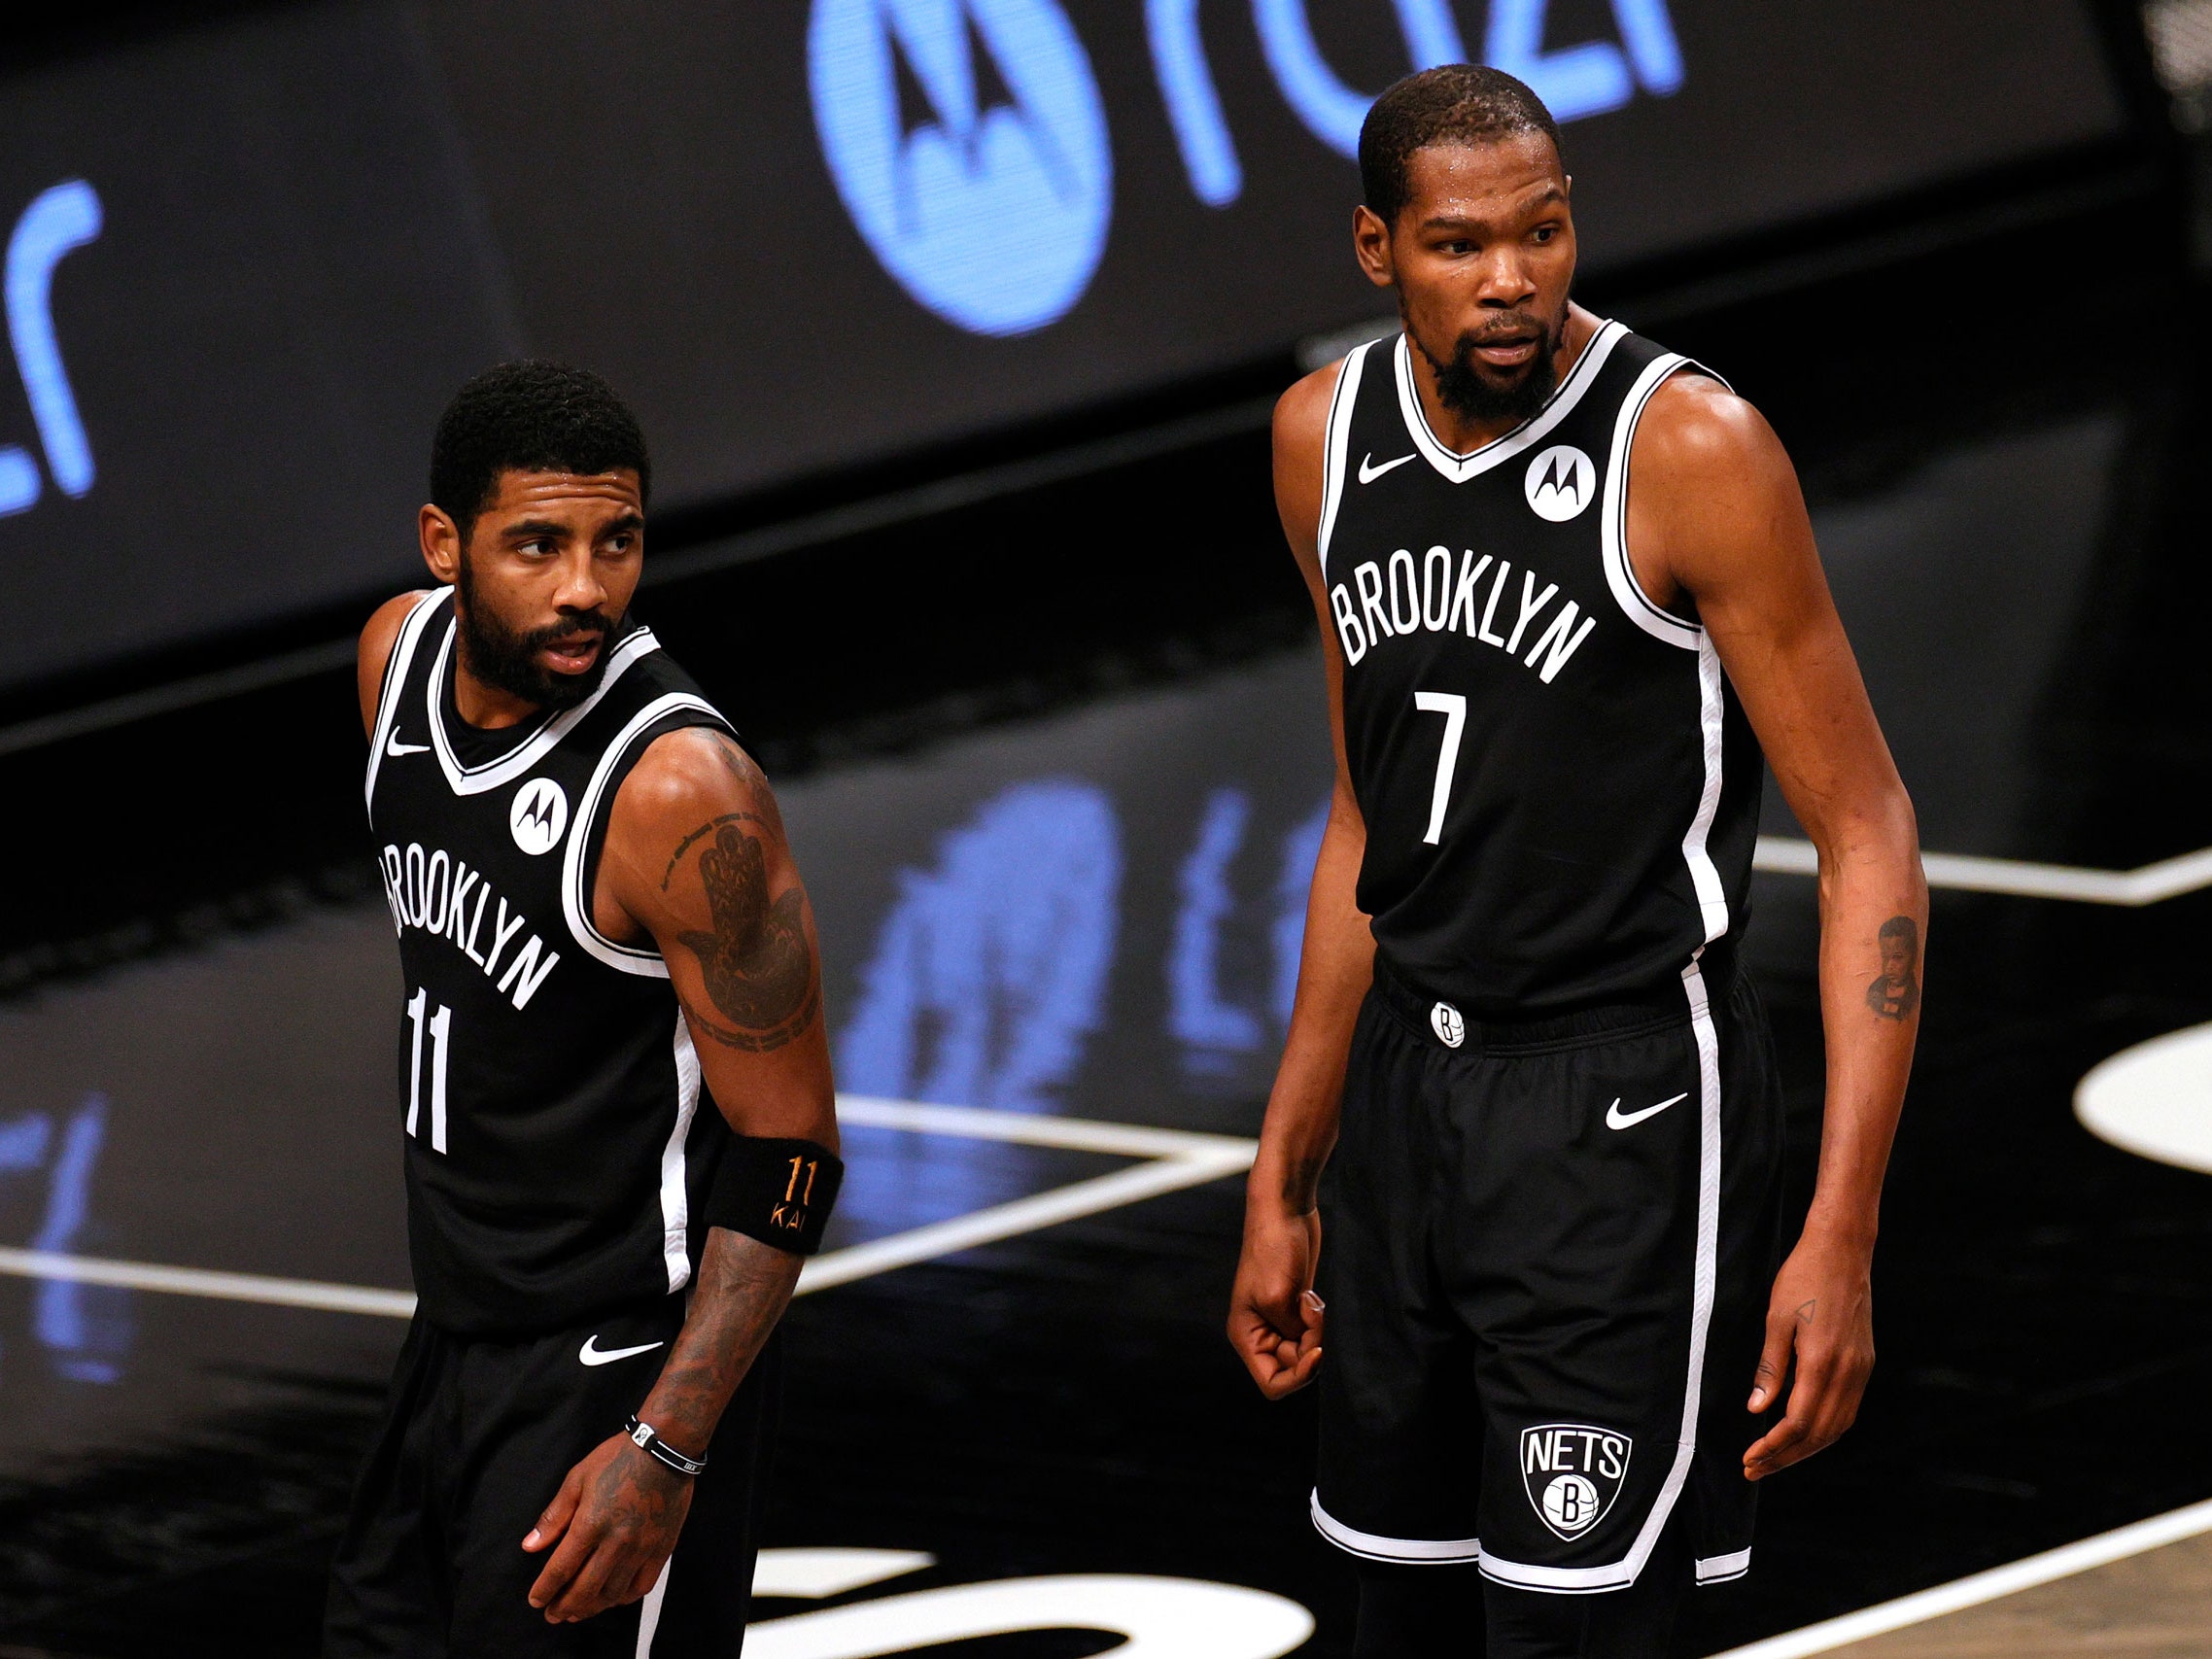 Inspiredlovers Thomas-BrooklynNets Kyrie Irving Makes His Decision Stand On Kevin Durant And Brooklyn Nets As He Said that he... NBA Sports  NBA News Kyrie Irving Kevin Durant Brooklyn Nets 